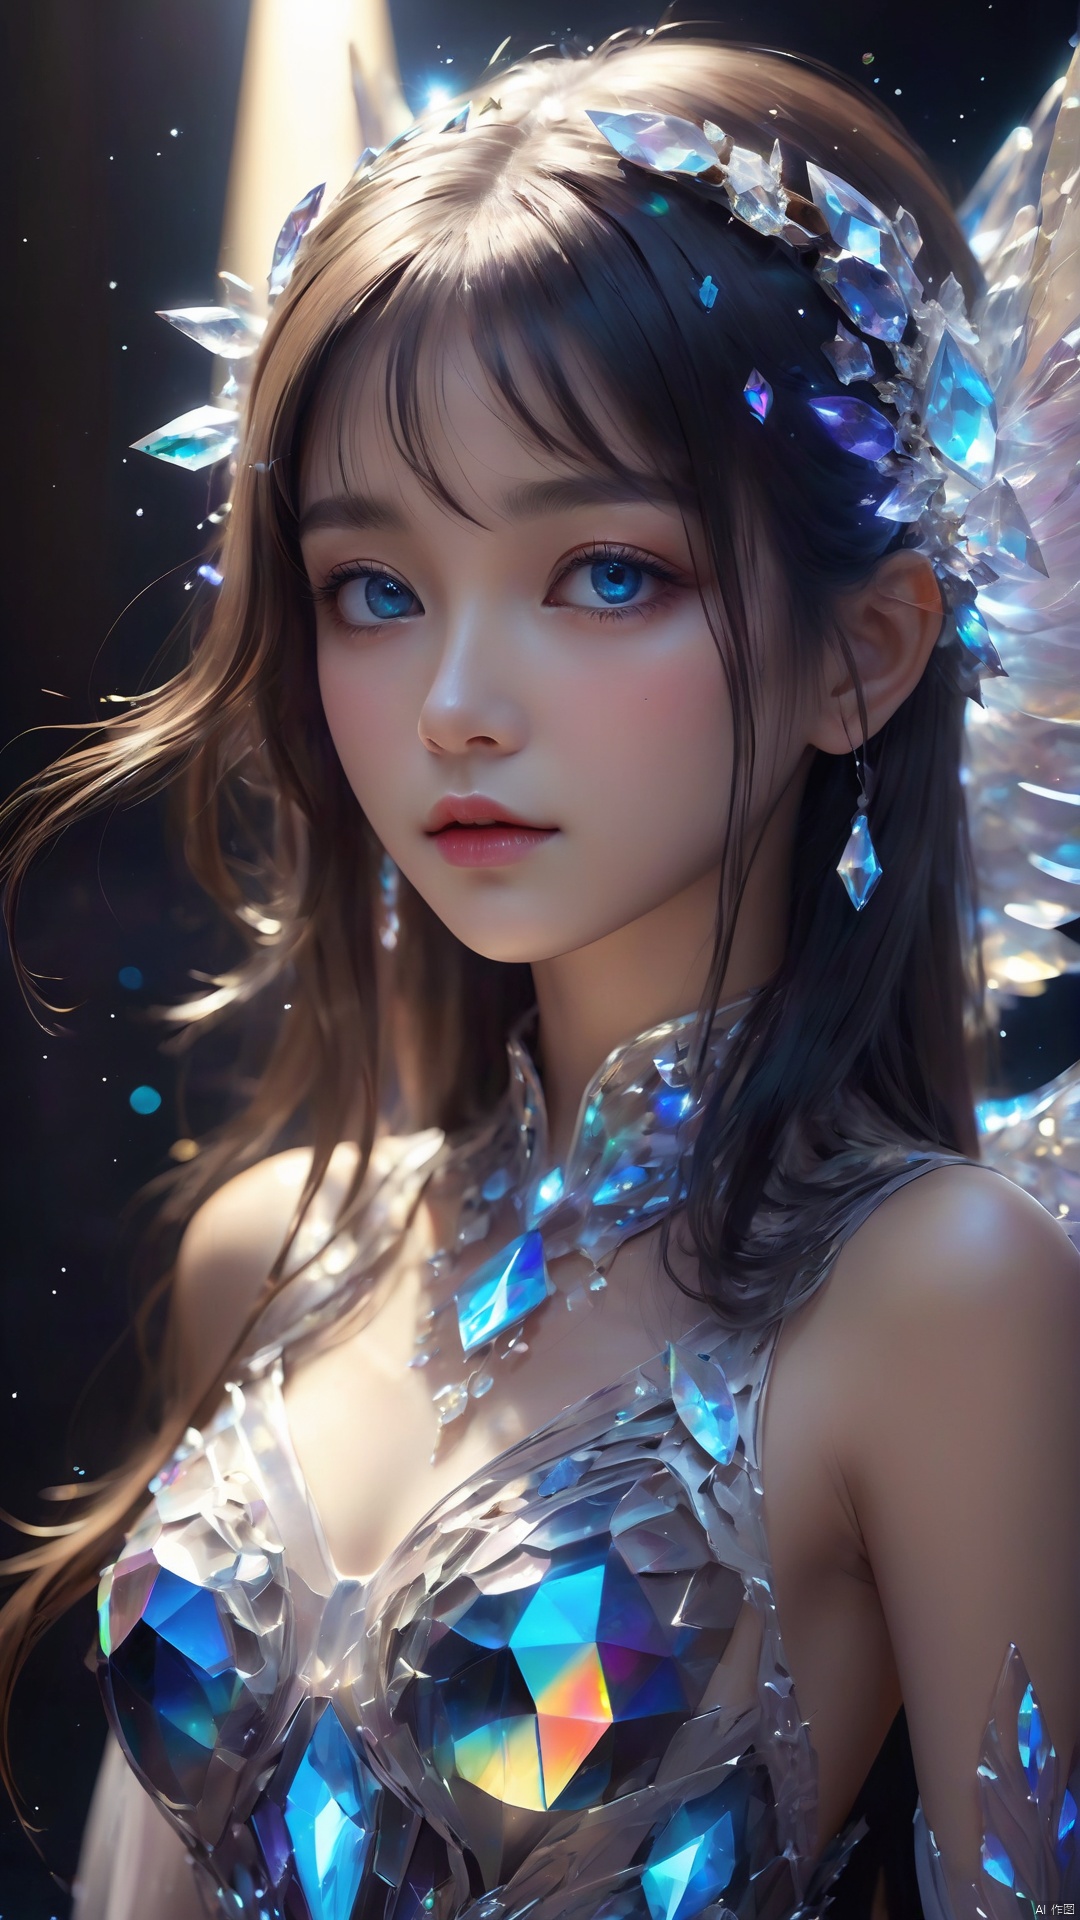  masterpiece,best quality,masterpiece,best quality,official art,extremely detailed CG unity 16k wallpaper,masterpiece,((1girl)),(science fiction:1.1),(ultra-detailed crystallization:1.5),(crystallizing girl:1.5),kaleidoscope,((iridescent:1.5) long hair),(glittering silver eyes),sitting,surrounded by colorful crystals,blue skin,(skin fusion with crystal:1.8),looking up,face focus,simple dress,transparent crystals,flat dark background,lens flare,prism, 1girl, light master, wings